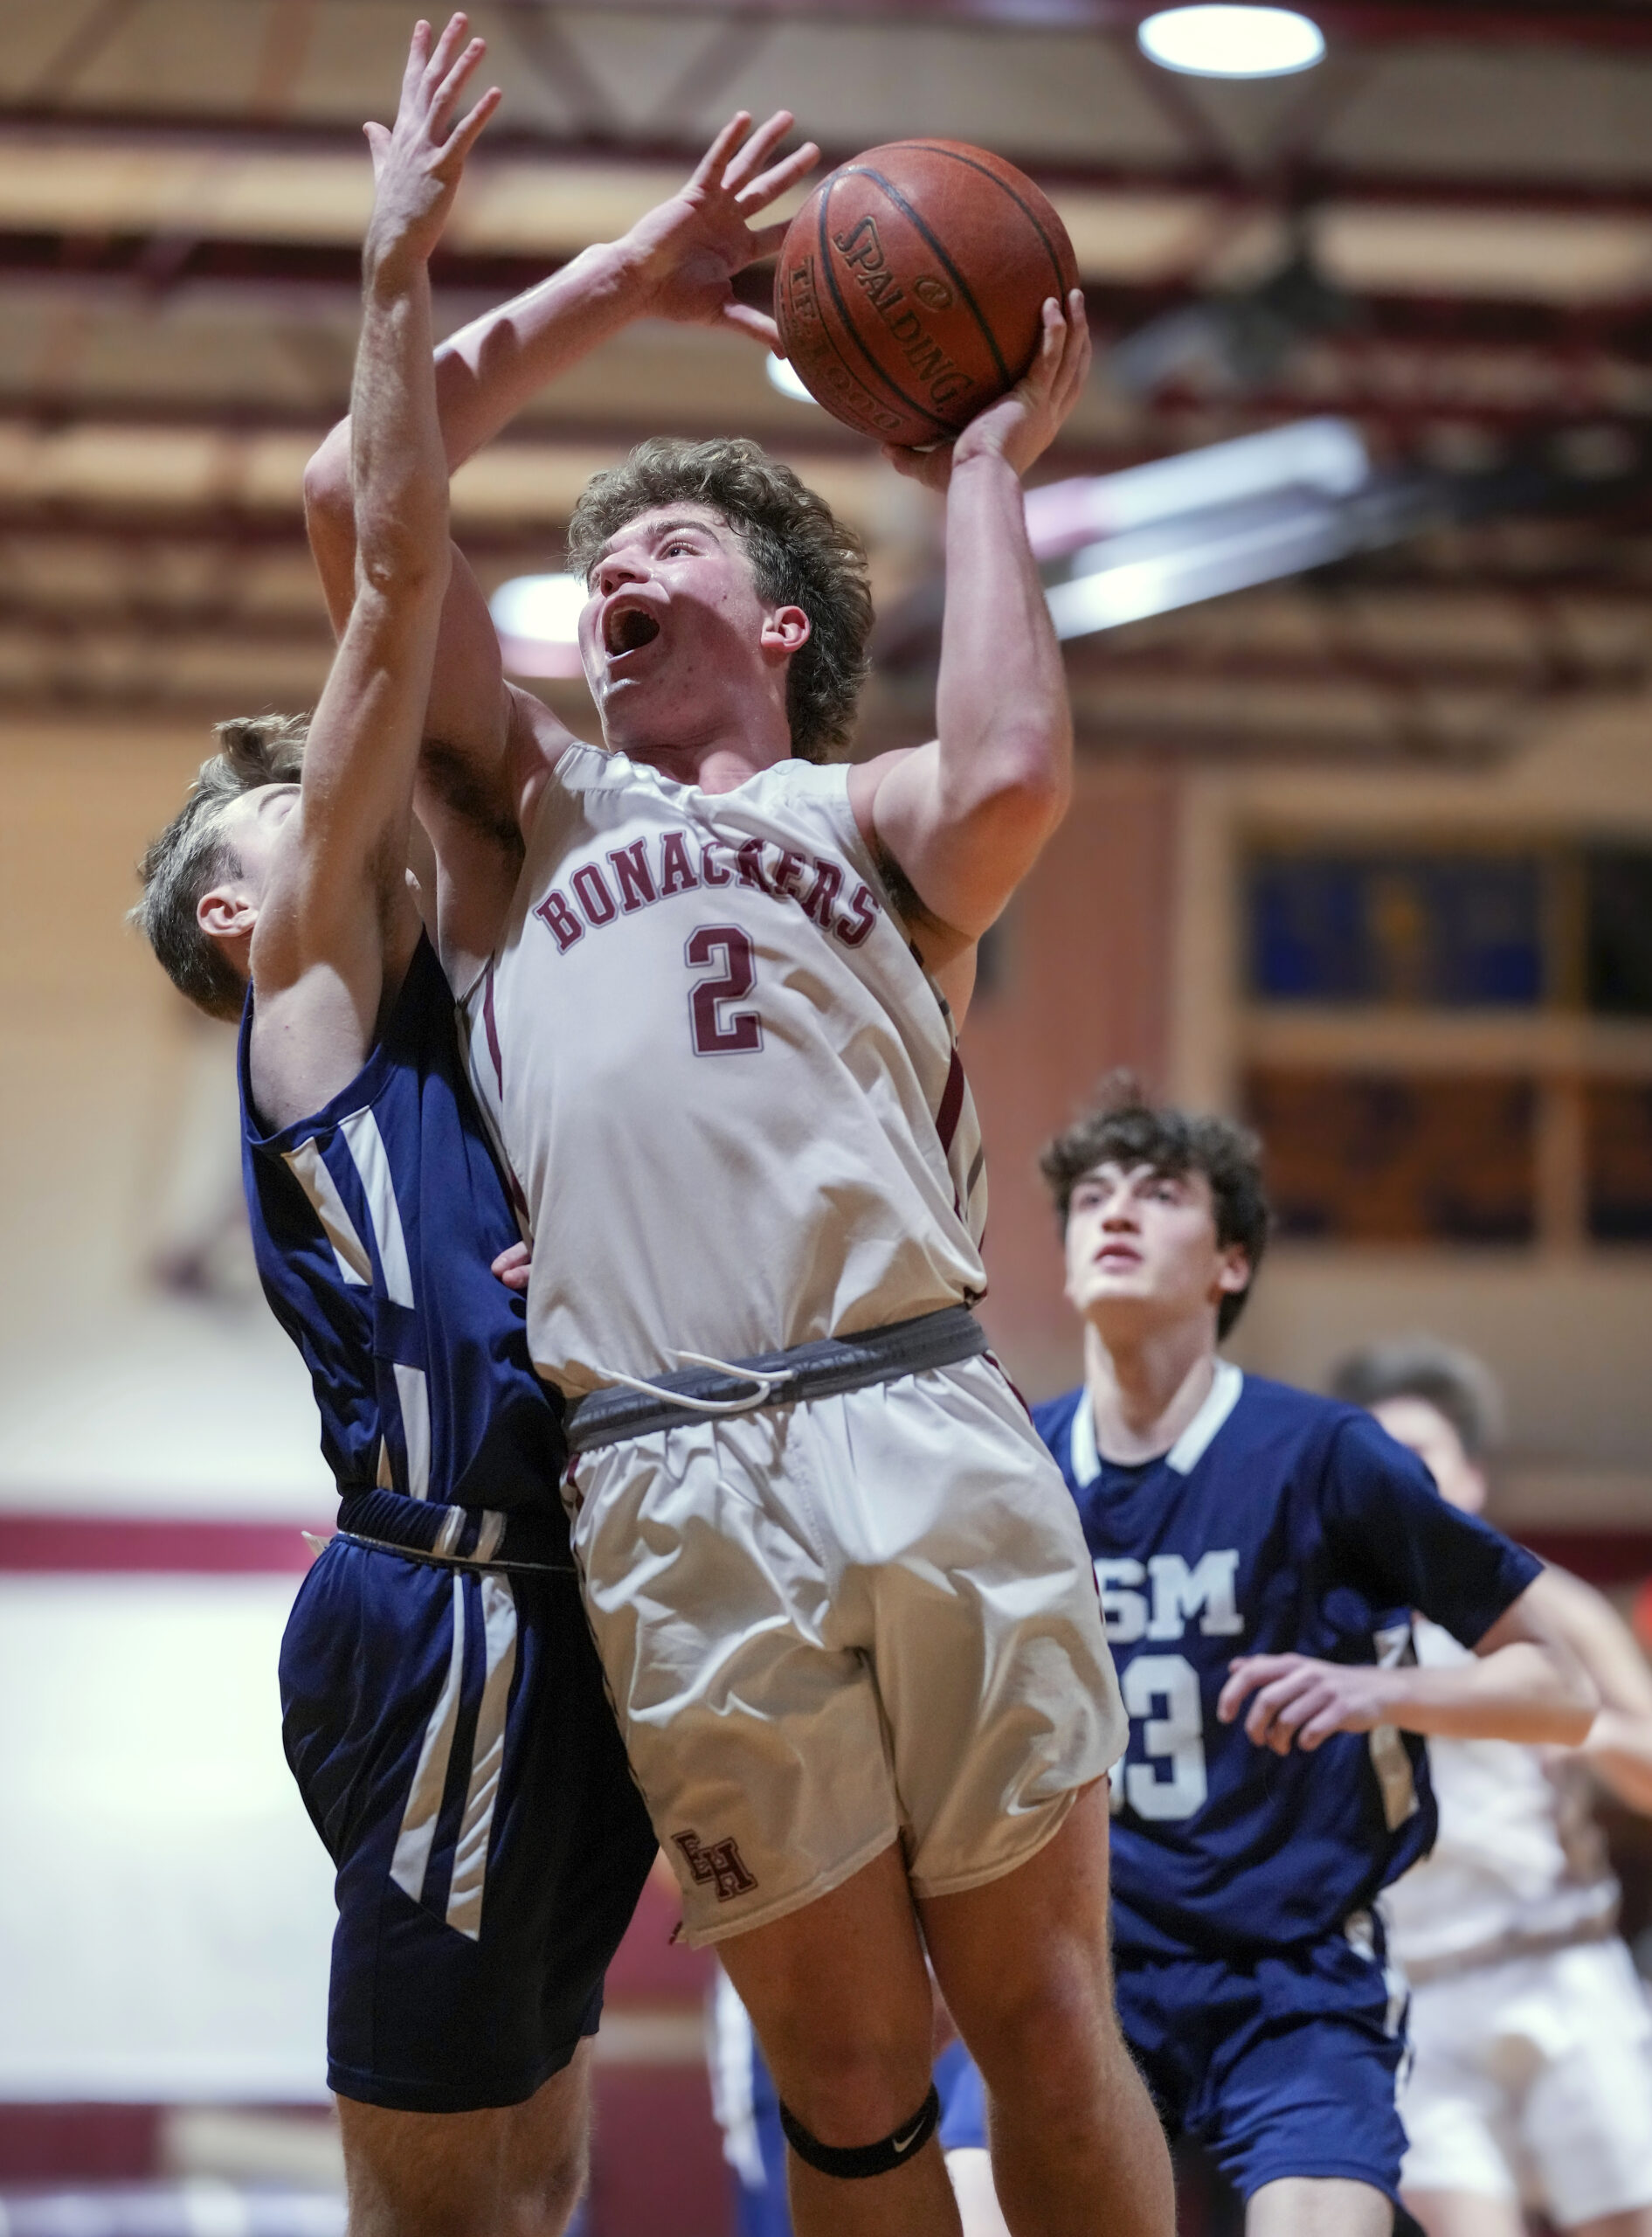 Senior Finn Byrnes muscles his way to the basket. RON ESPOSITO